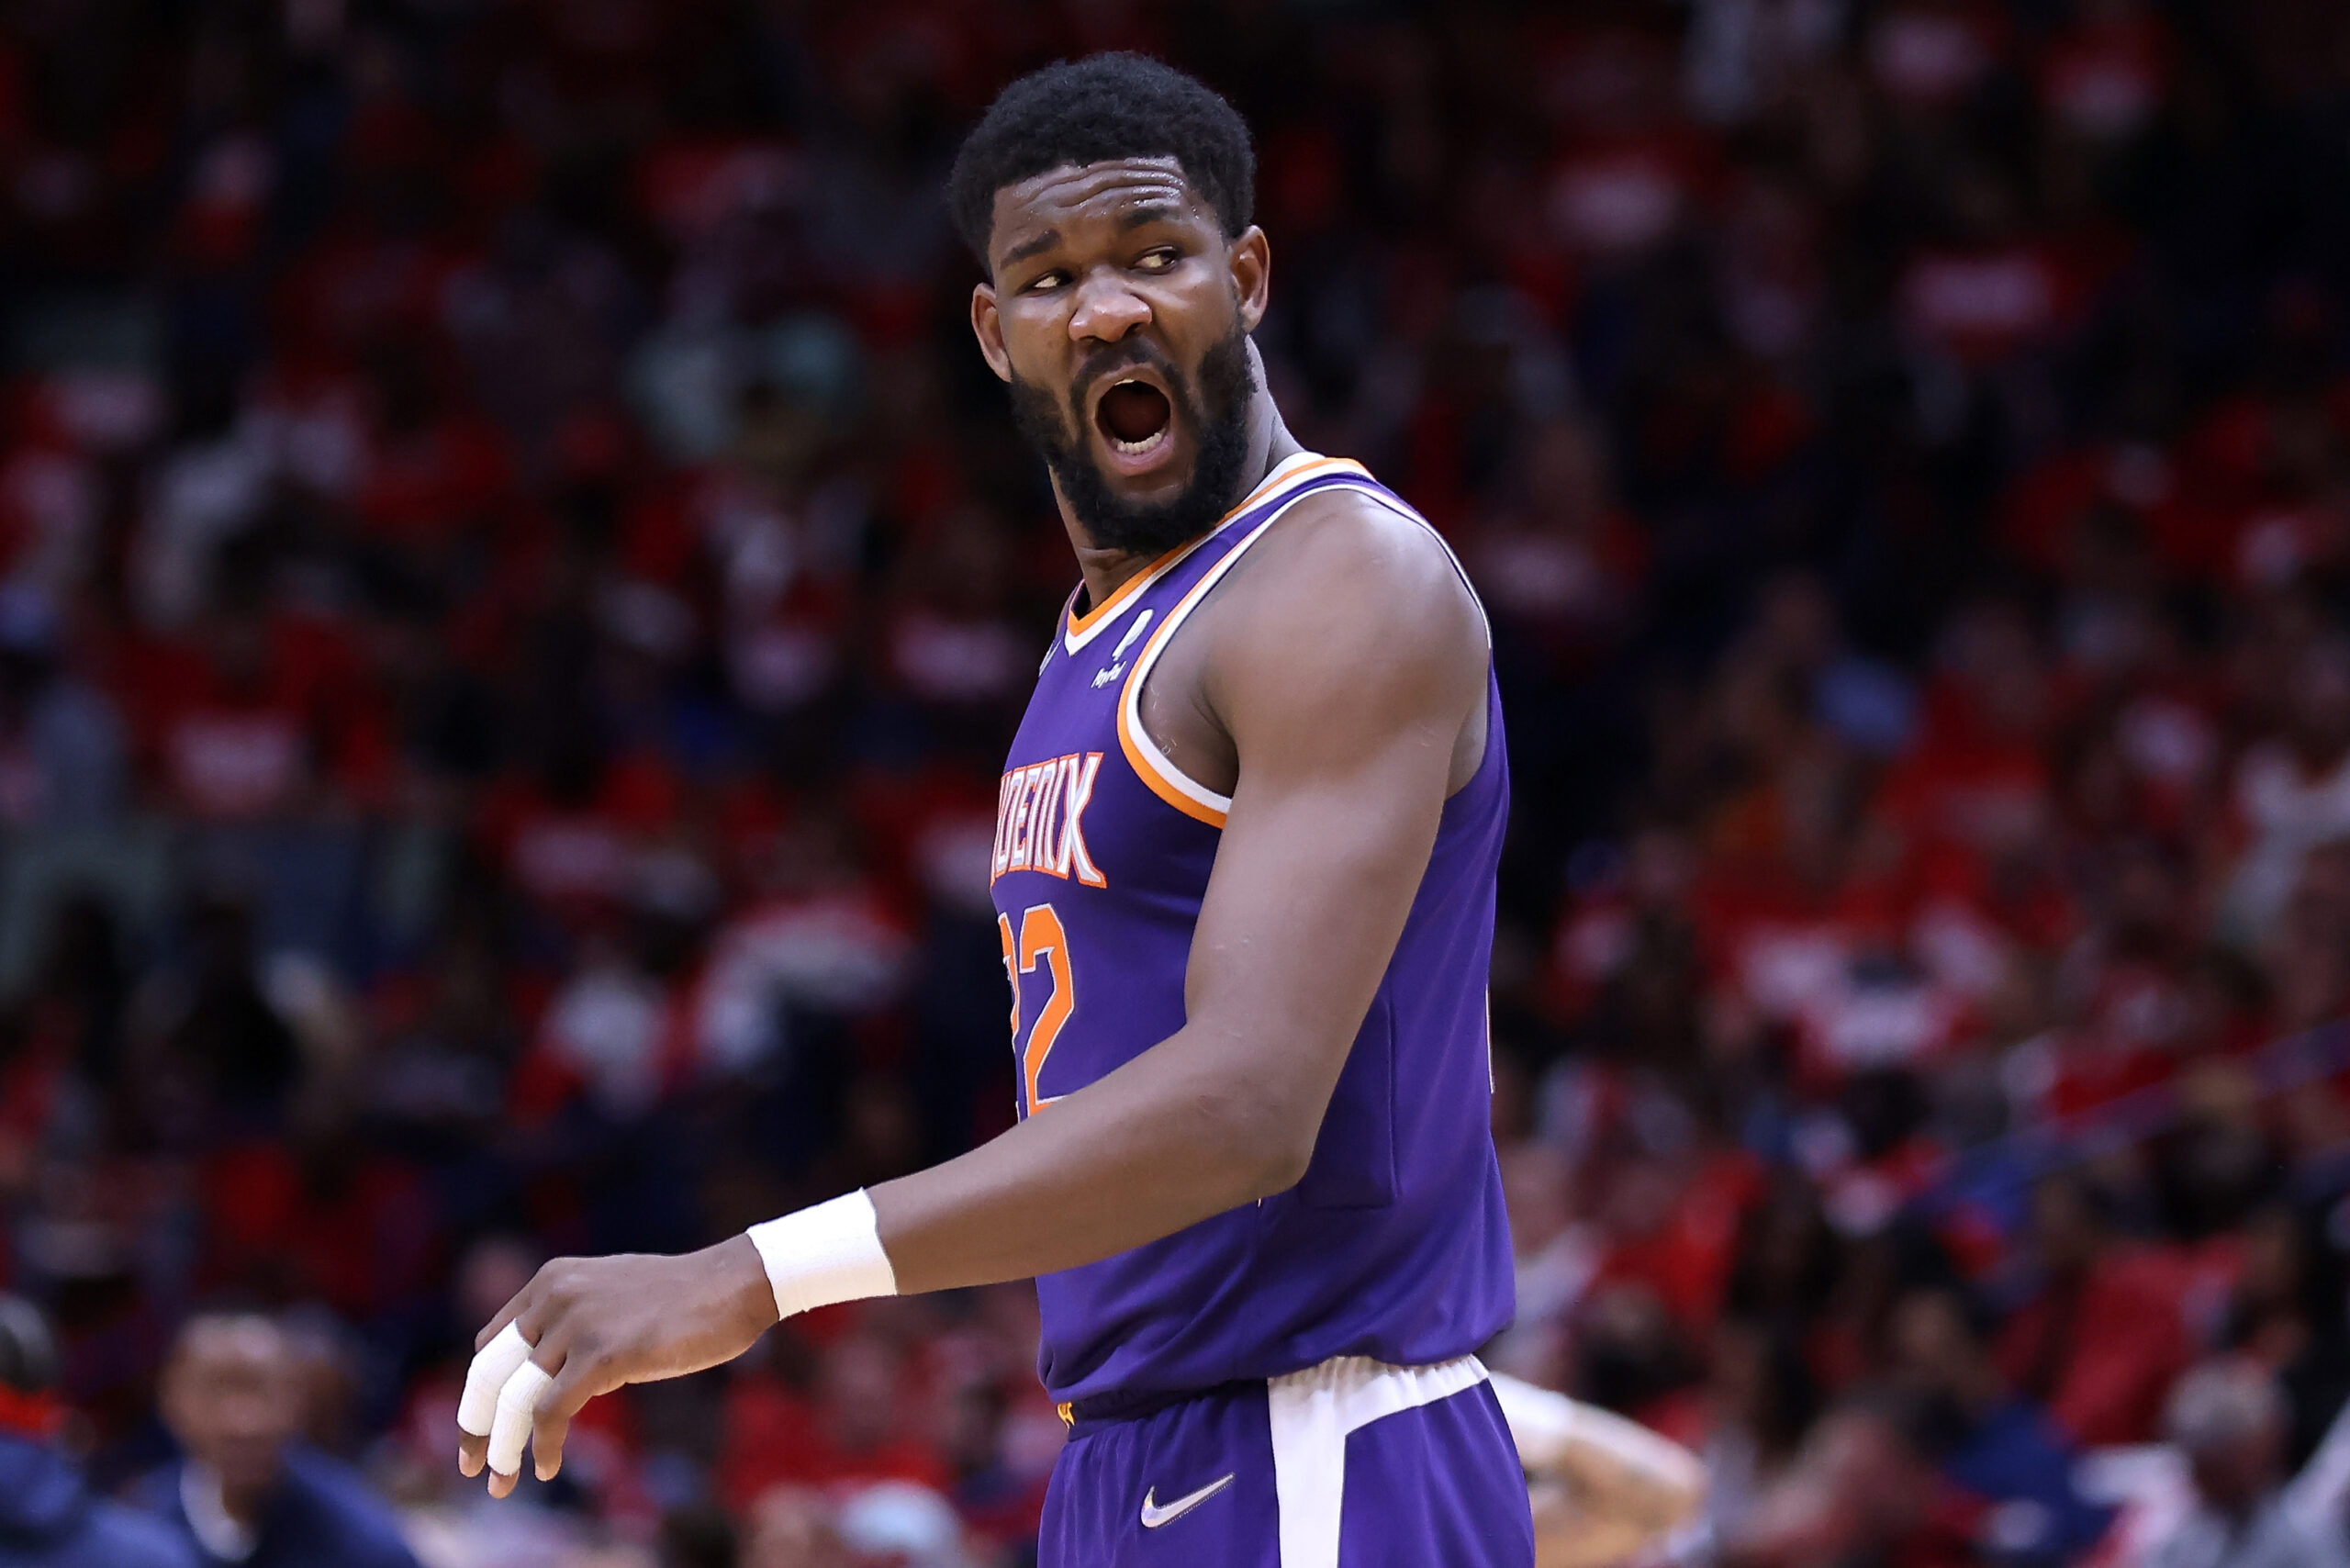 Deandre Ayton, Suns' Deandre Ayton Trade To The Clippers In Bold Proposal